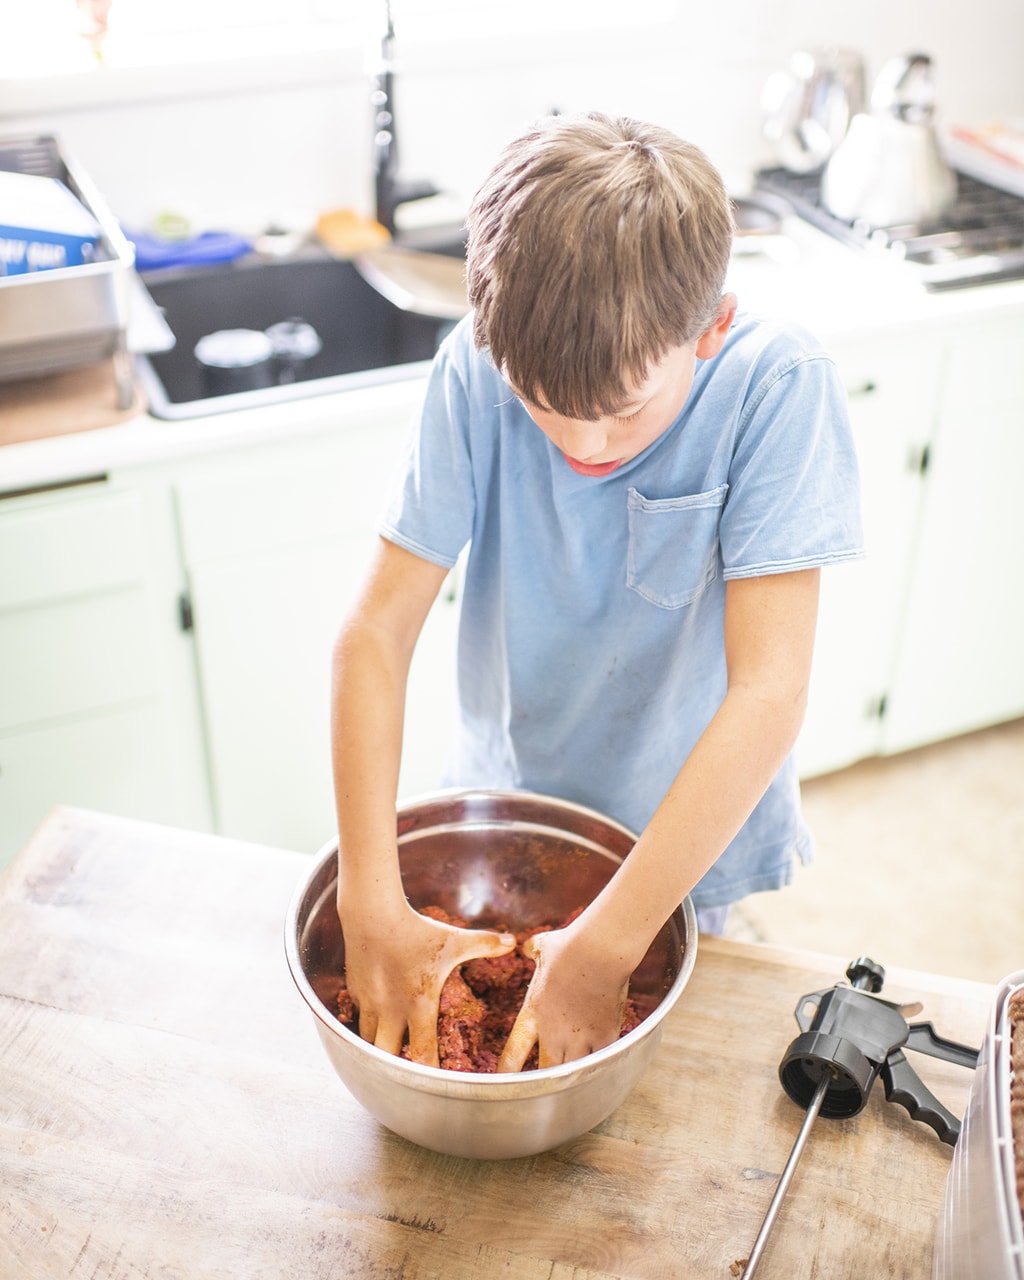 Olin day using his hands to mix in seasoning for beef jerky with a dehydrator